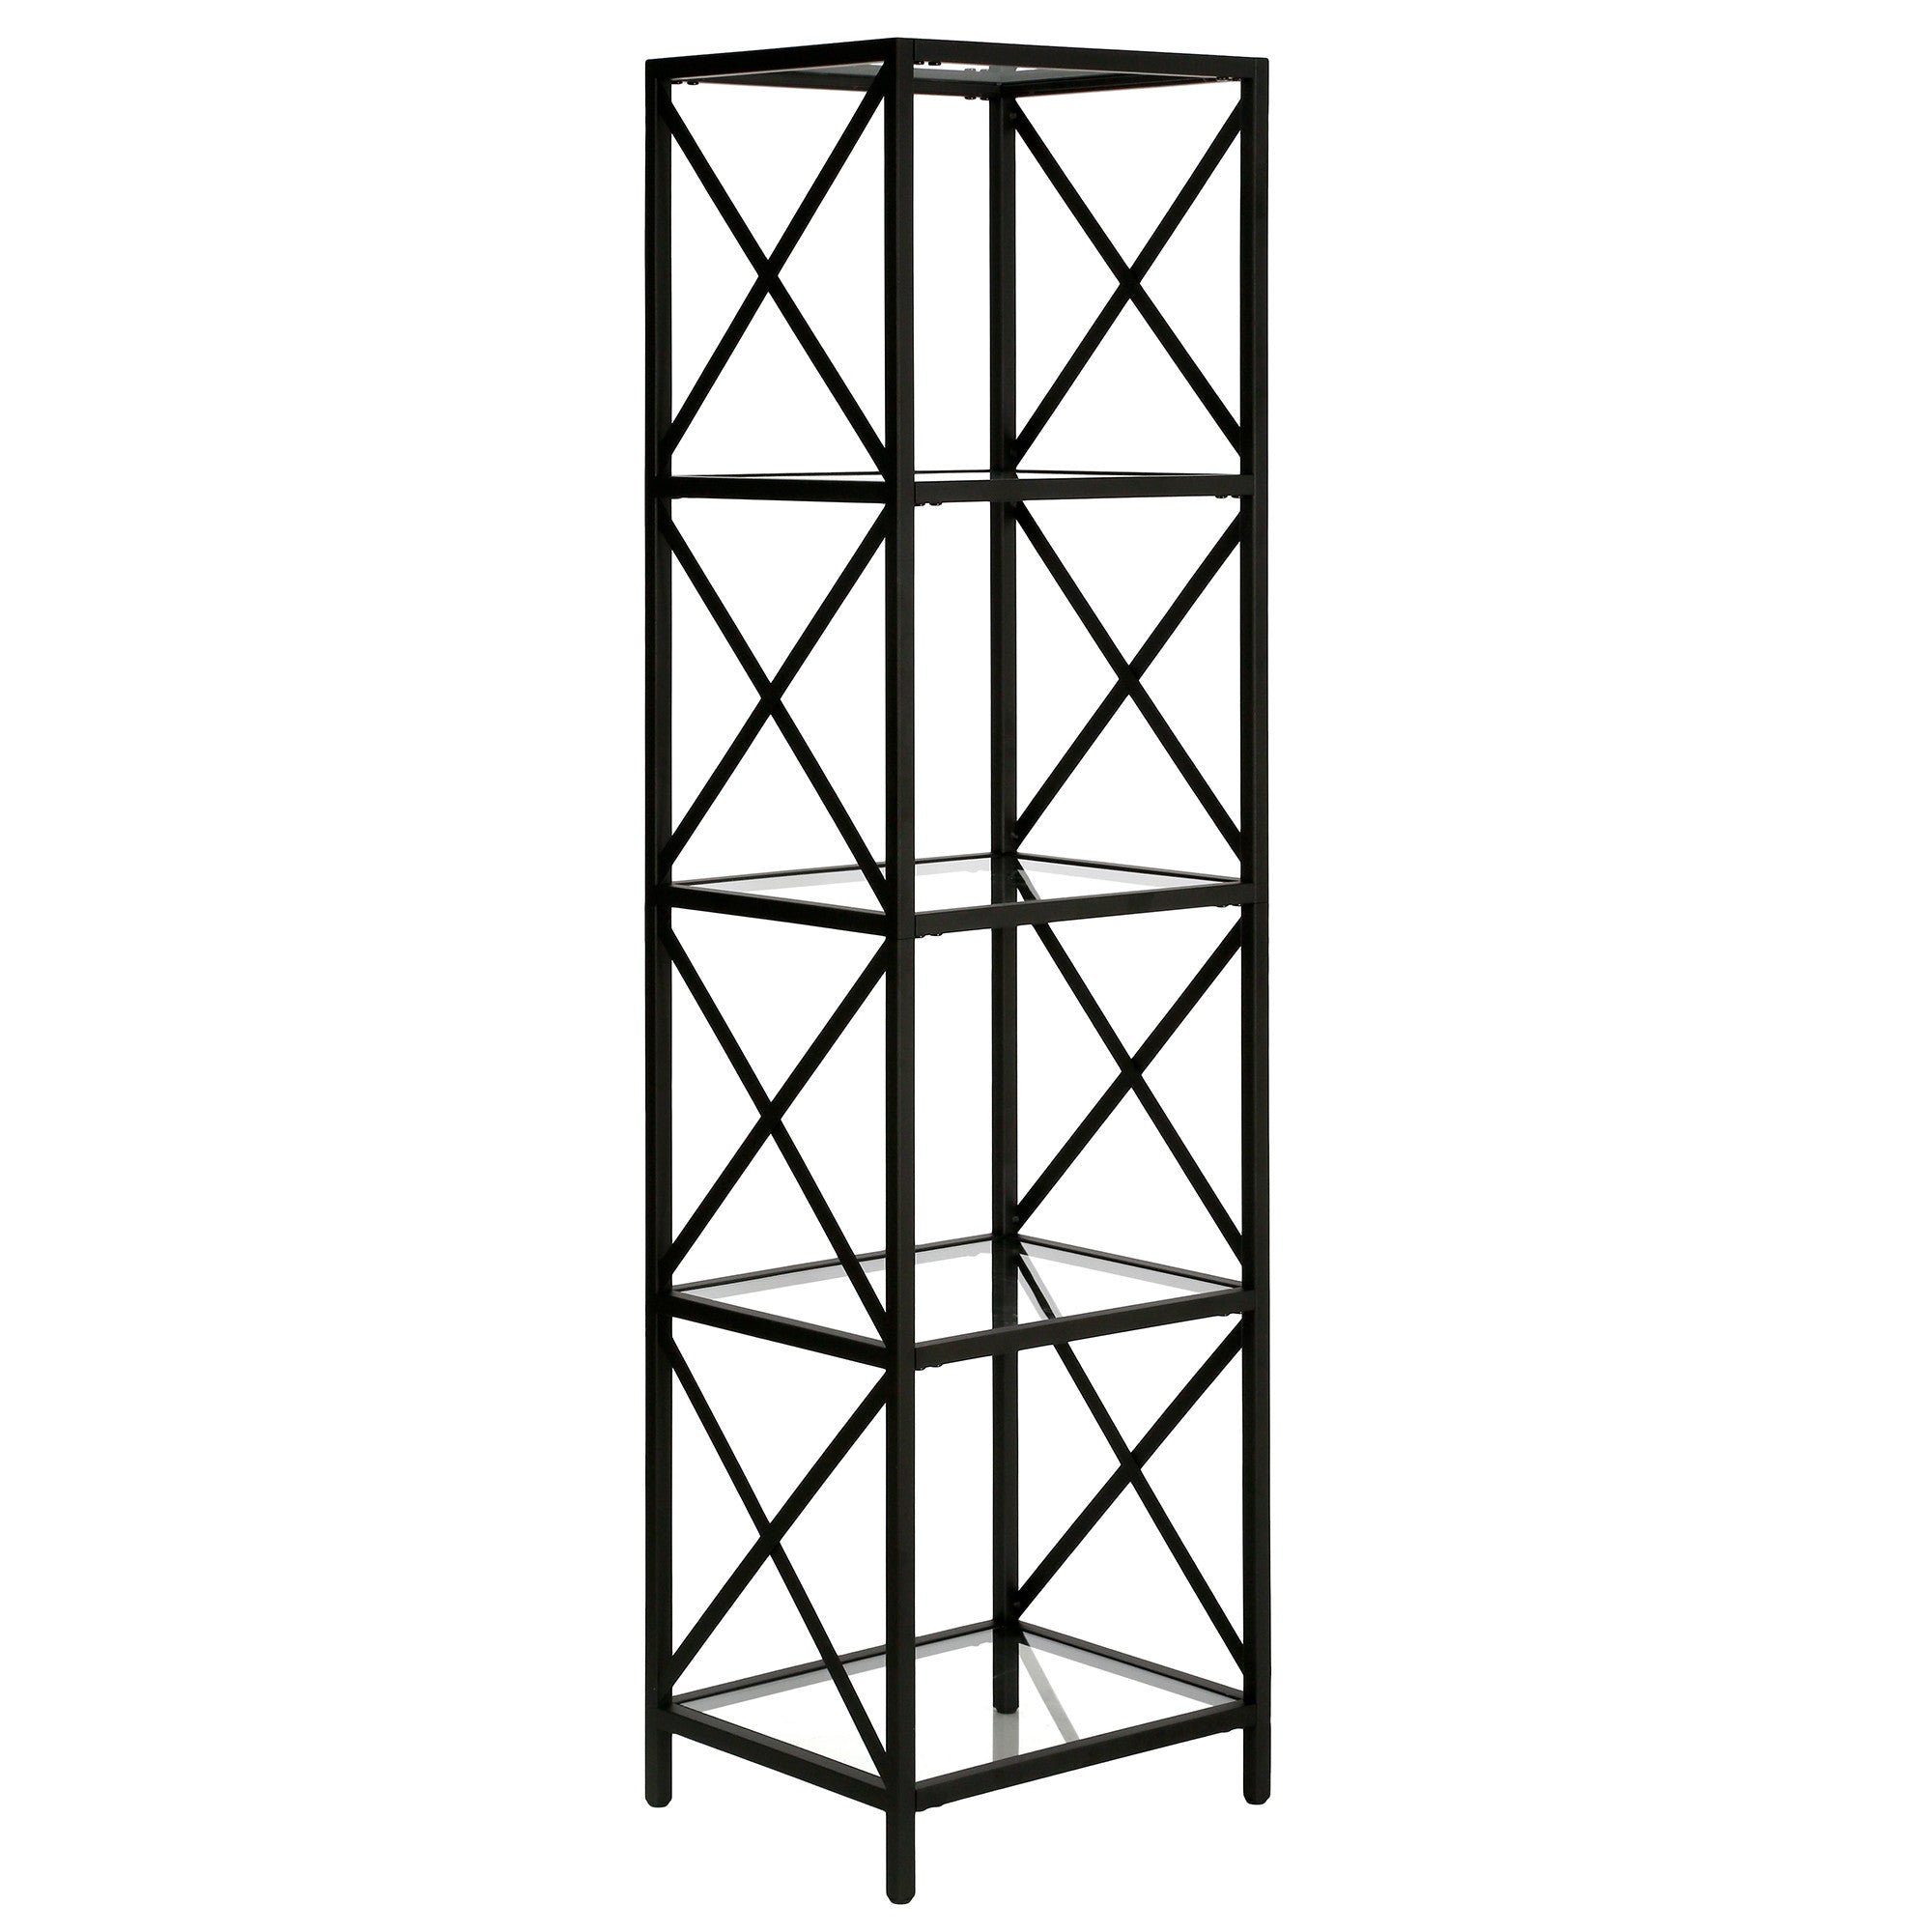 66" Black Metal And Glass Four Tier Etagere Bookcase